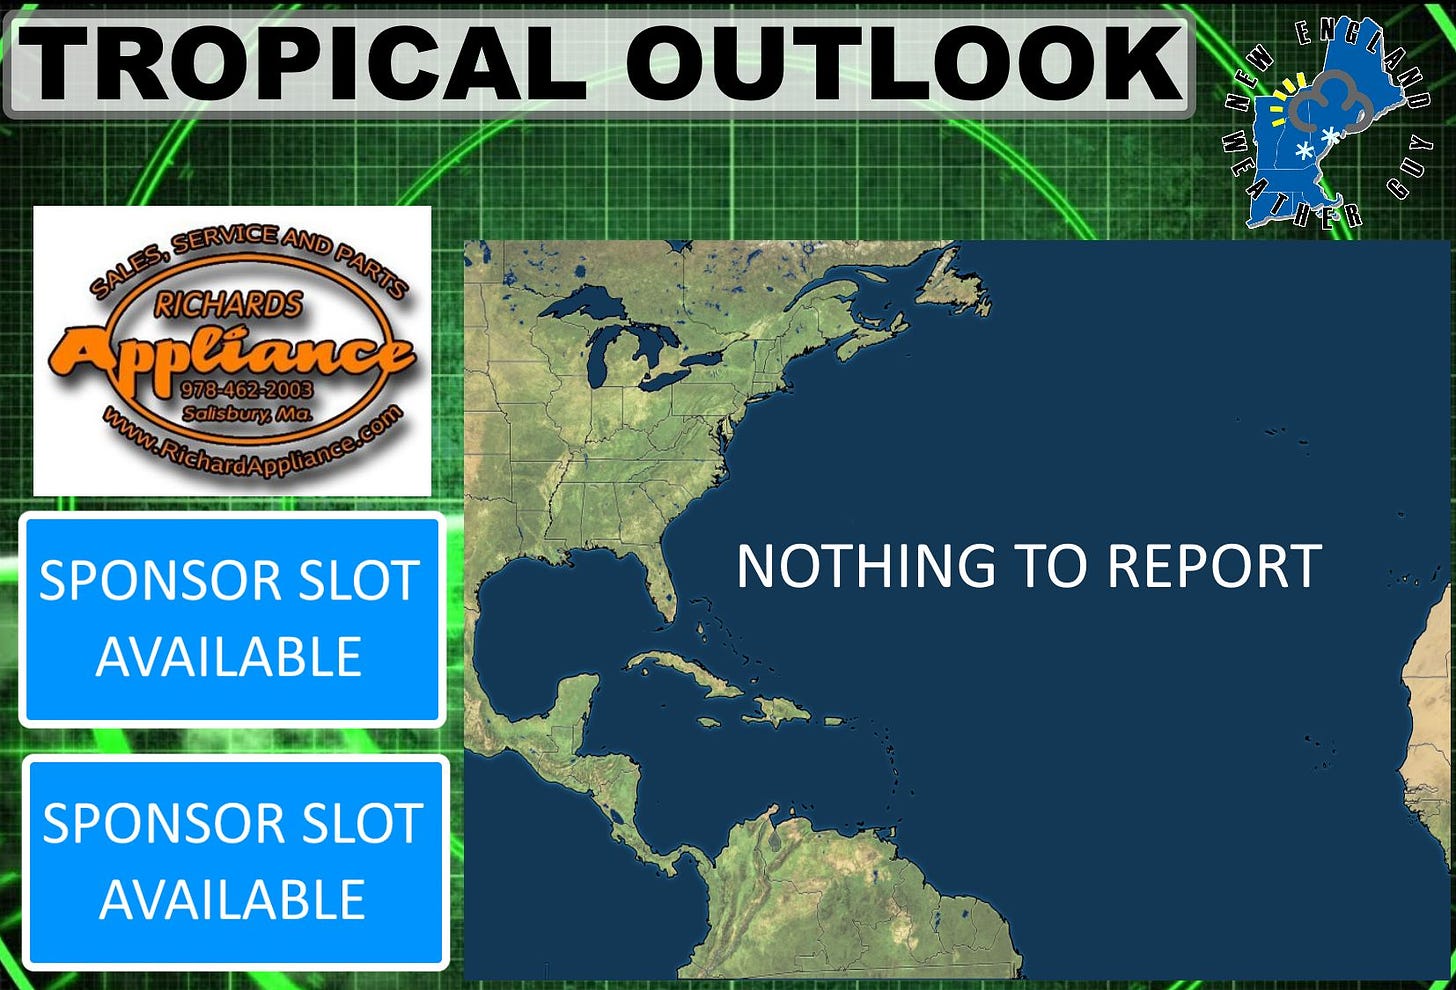 May be a graphic of map and text that says 'TROPICAL OUTLOOK ٦ PARTS RICHARDS Appliance អ Salisbury E GS SPONSOR SLOT AVAILABLE NOTHING TO REPORT SPONSOR SLOT AVAILABLE'